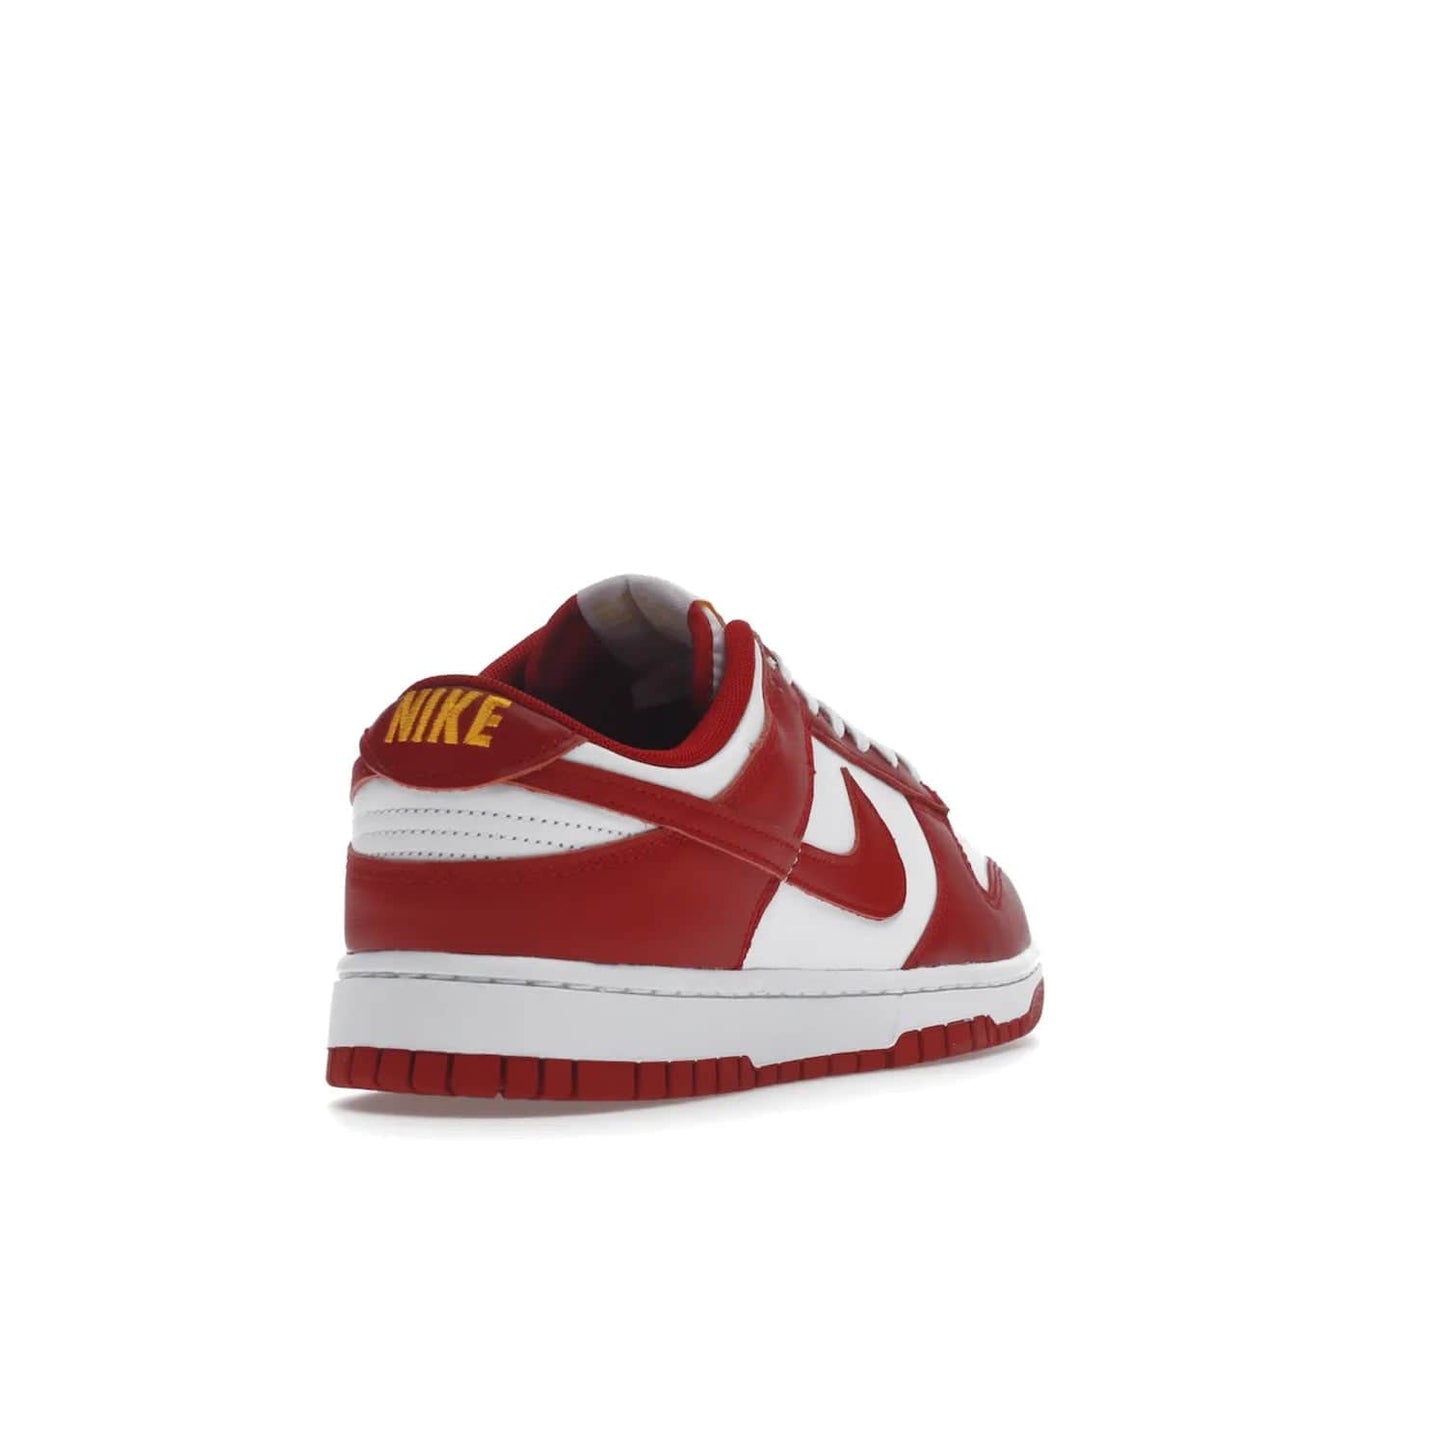 Nike Dunk Low USC - Image 31 - Only at www.BallersClubKickz.com - The Nike Dunk Low USC DD1391-602 colorway captures the eye of University of Southern California fans. Crafted with leather and rubber upper and outsole, this stylish sneaker features a white, gym red, and yellow colorway. With yellow Nike branding, white perforated vamp, and red suede Swoosh, this sneaker turns heads. Get the classic Nike Dunk Low USC releasing on November 9th, 2022.